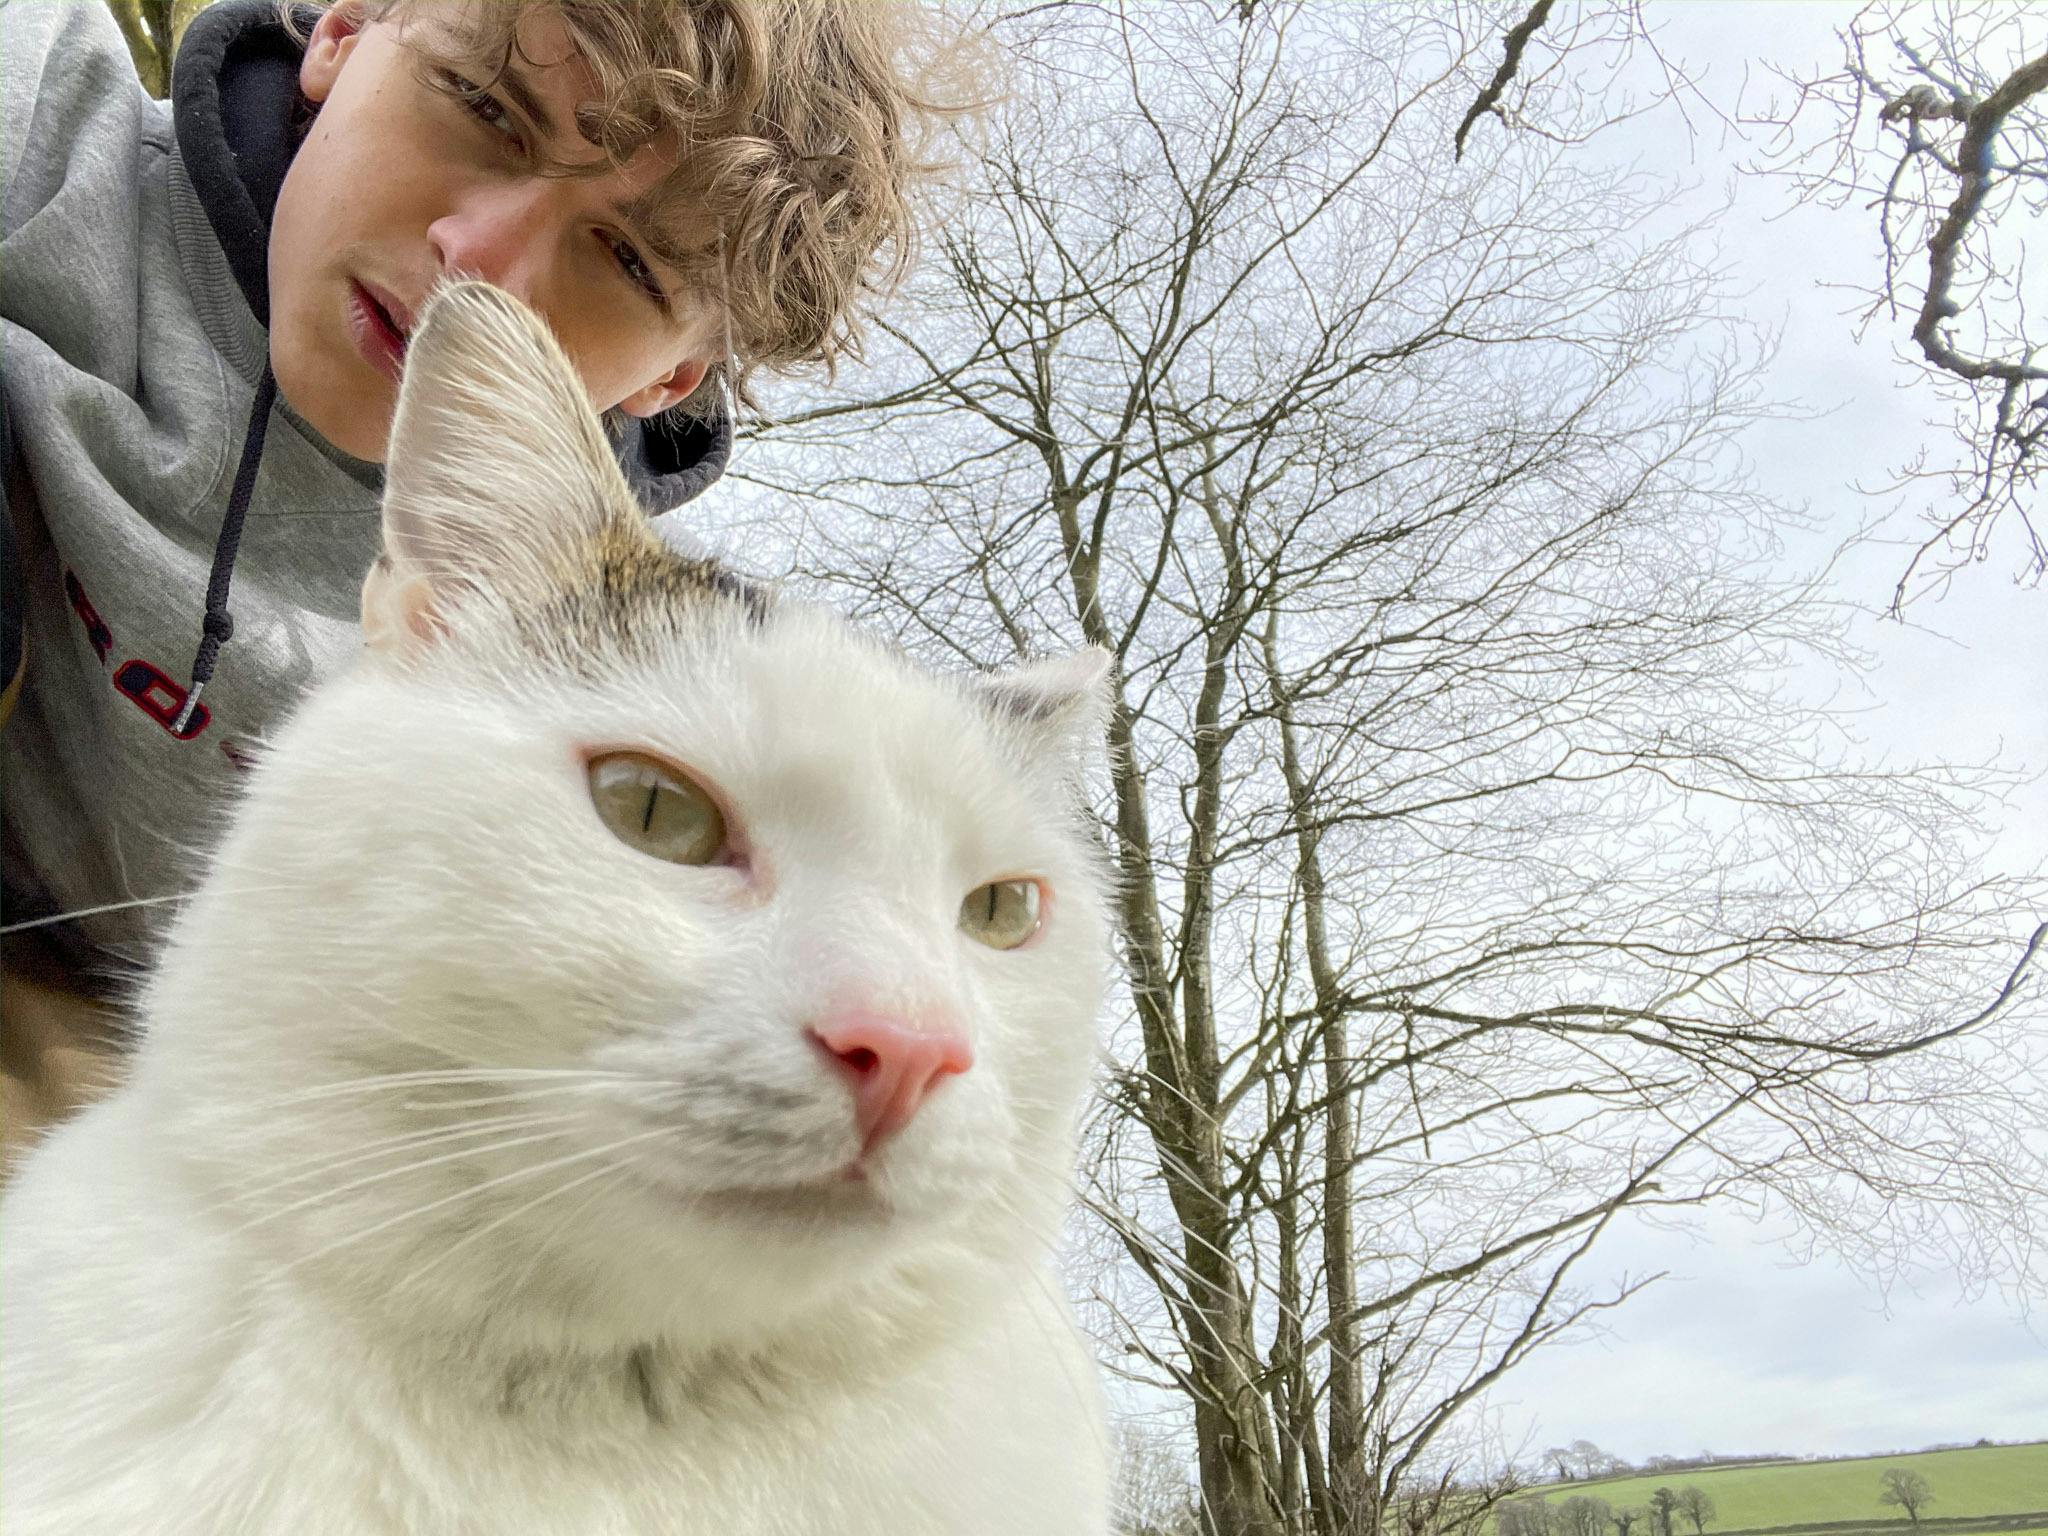 Extended Diploma Photography student Nicolas Gruzdev with his cat Arthur